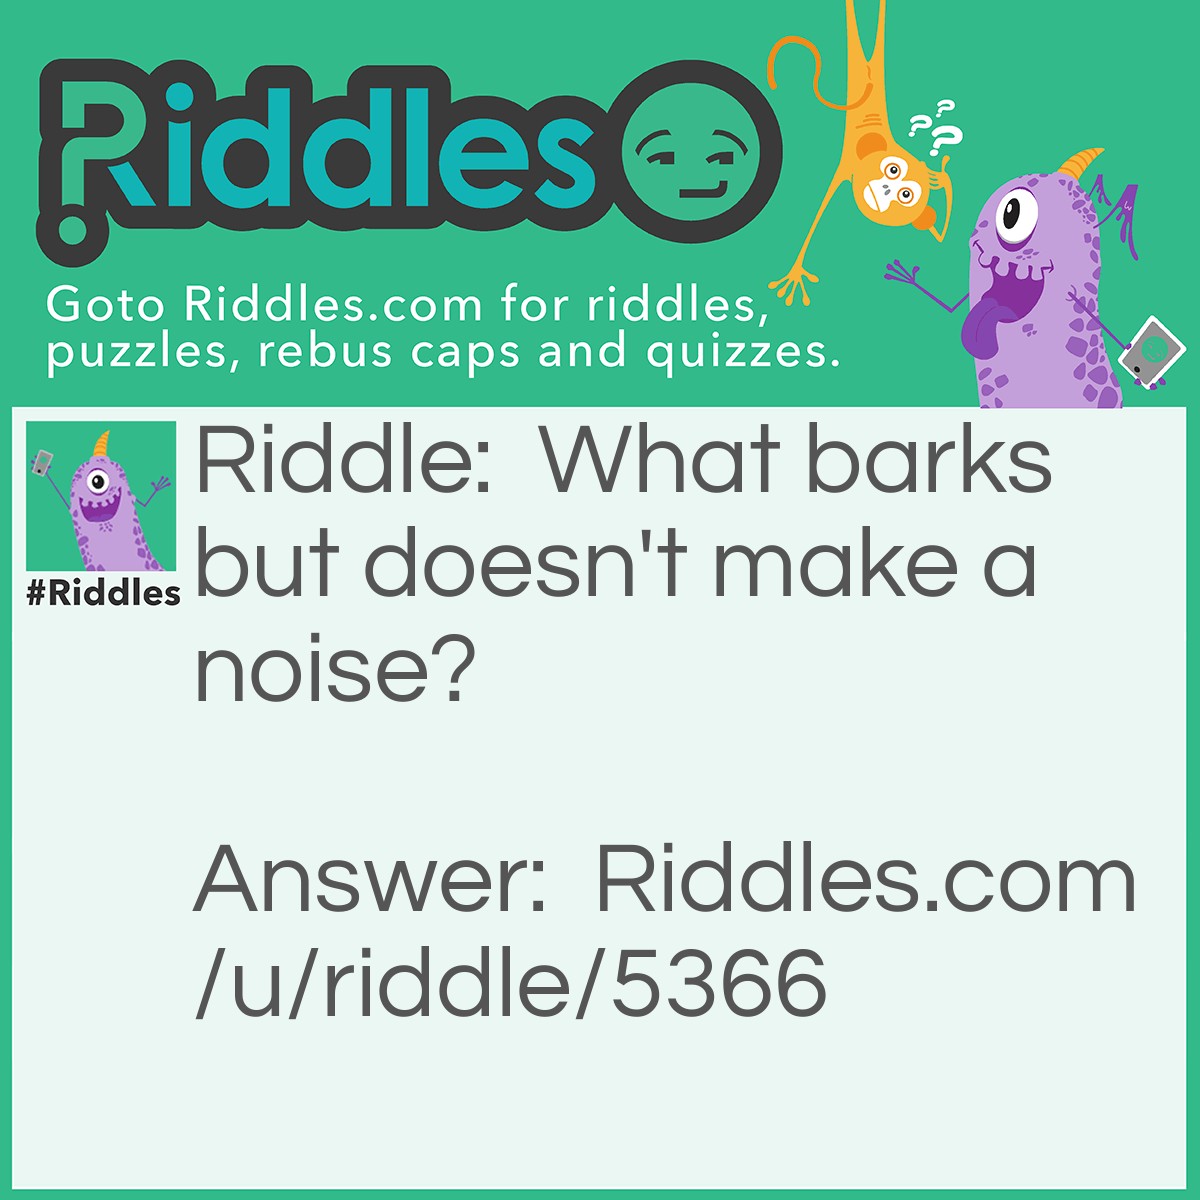 Riddle: What barks but doesn't make a noise? Answer: A Tree.